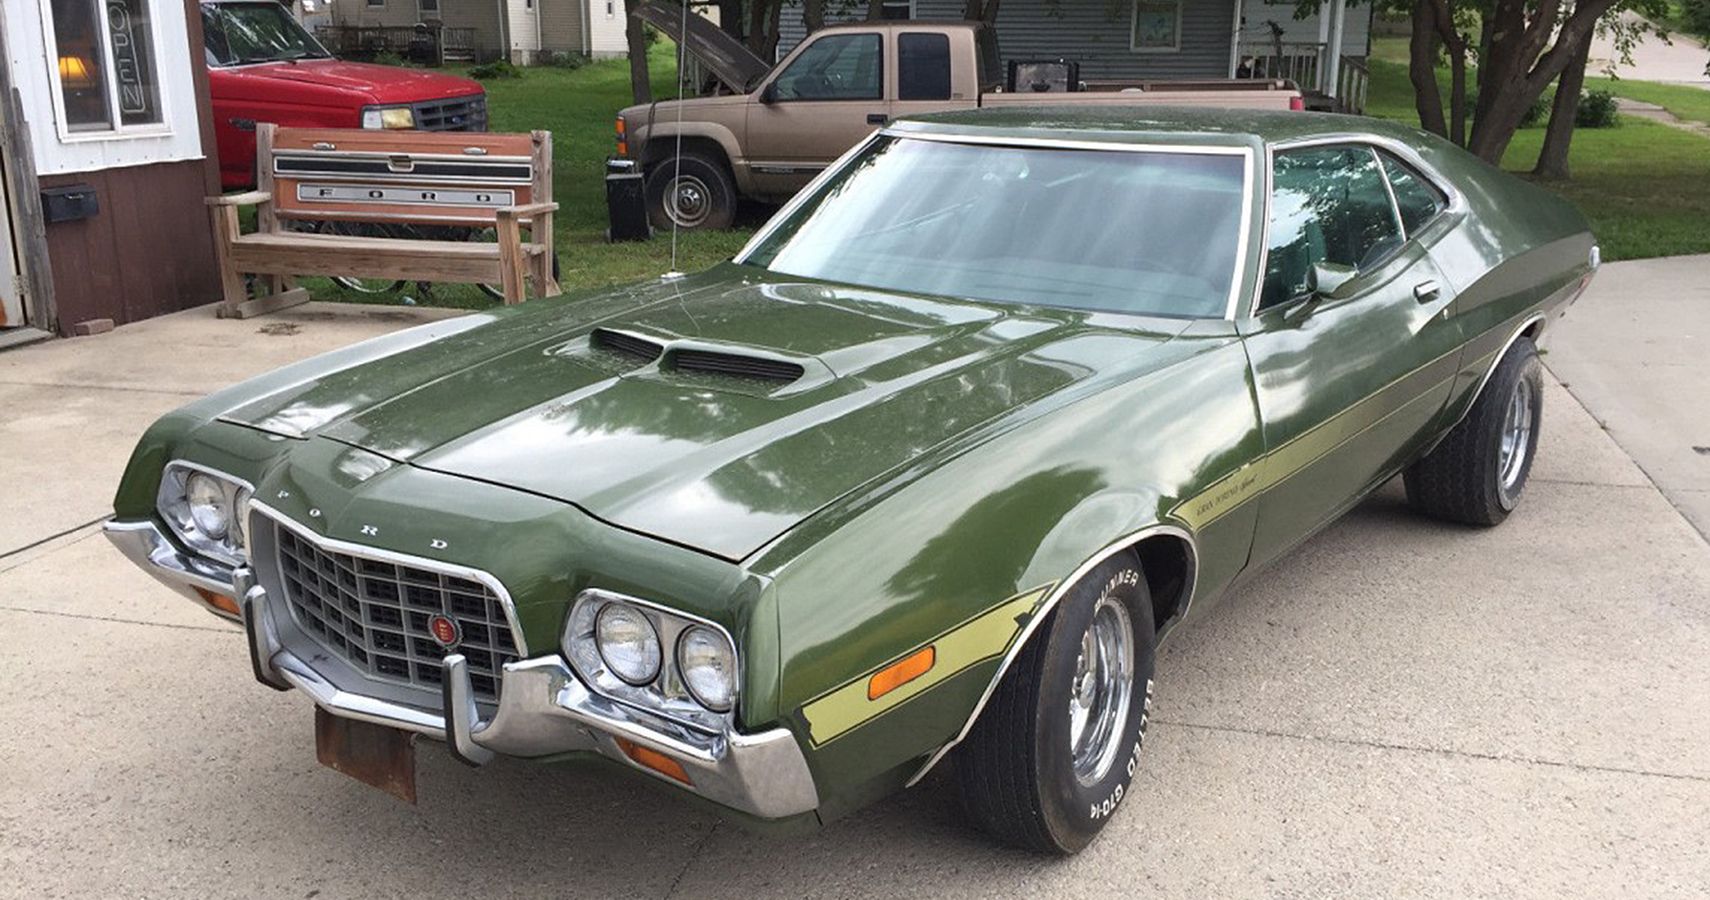 Here's What Happened To The Ford That Clint Eastwood Drove In Gran Torino